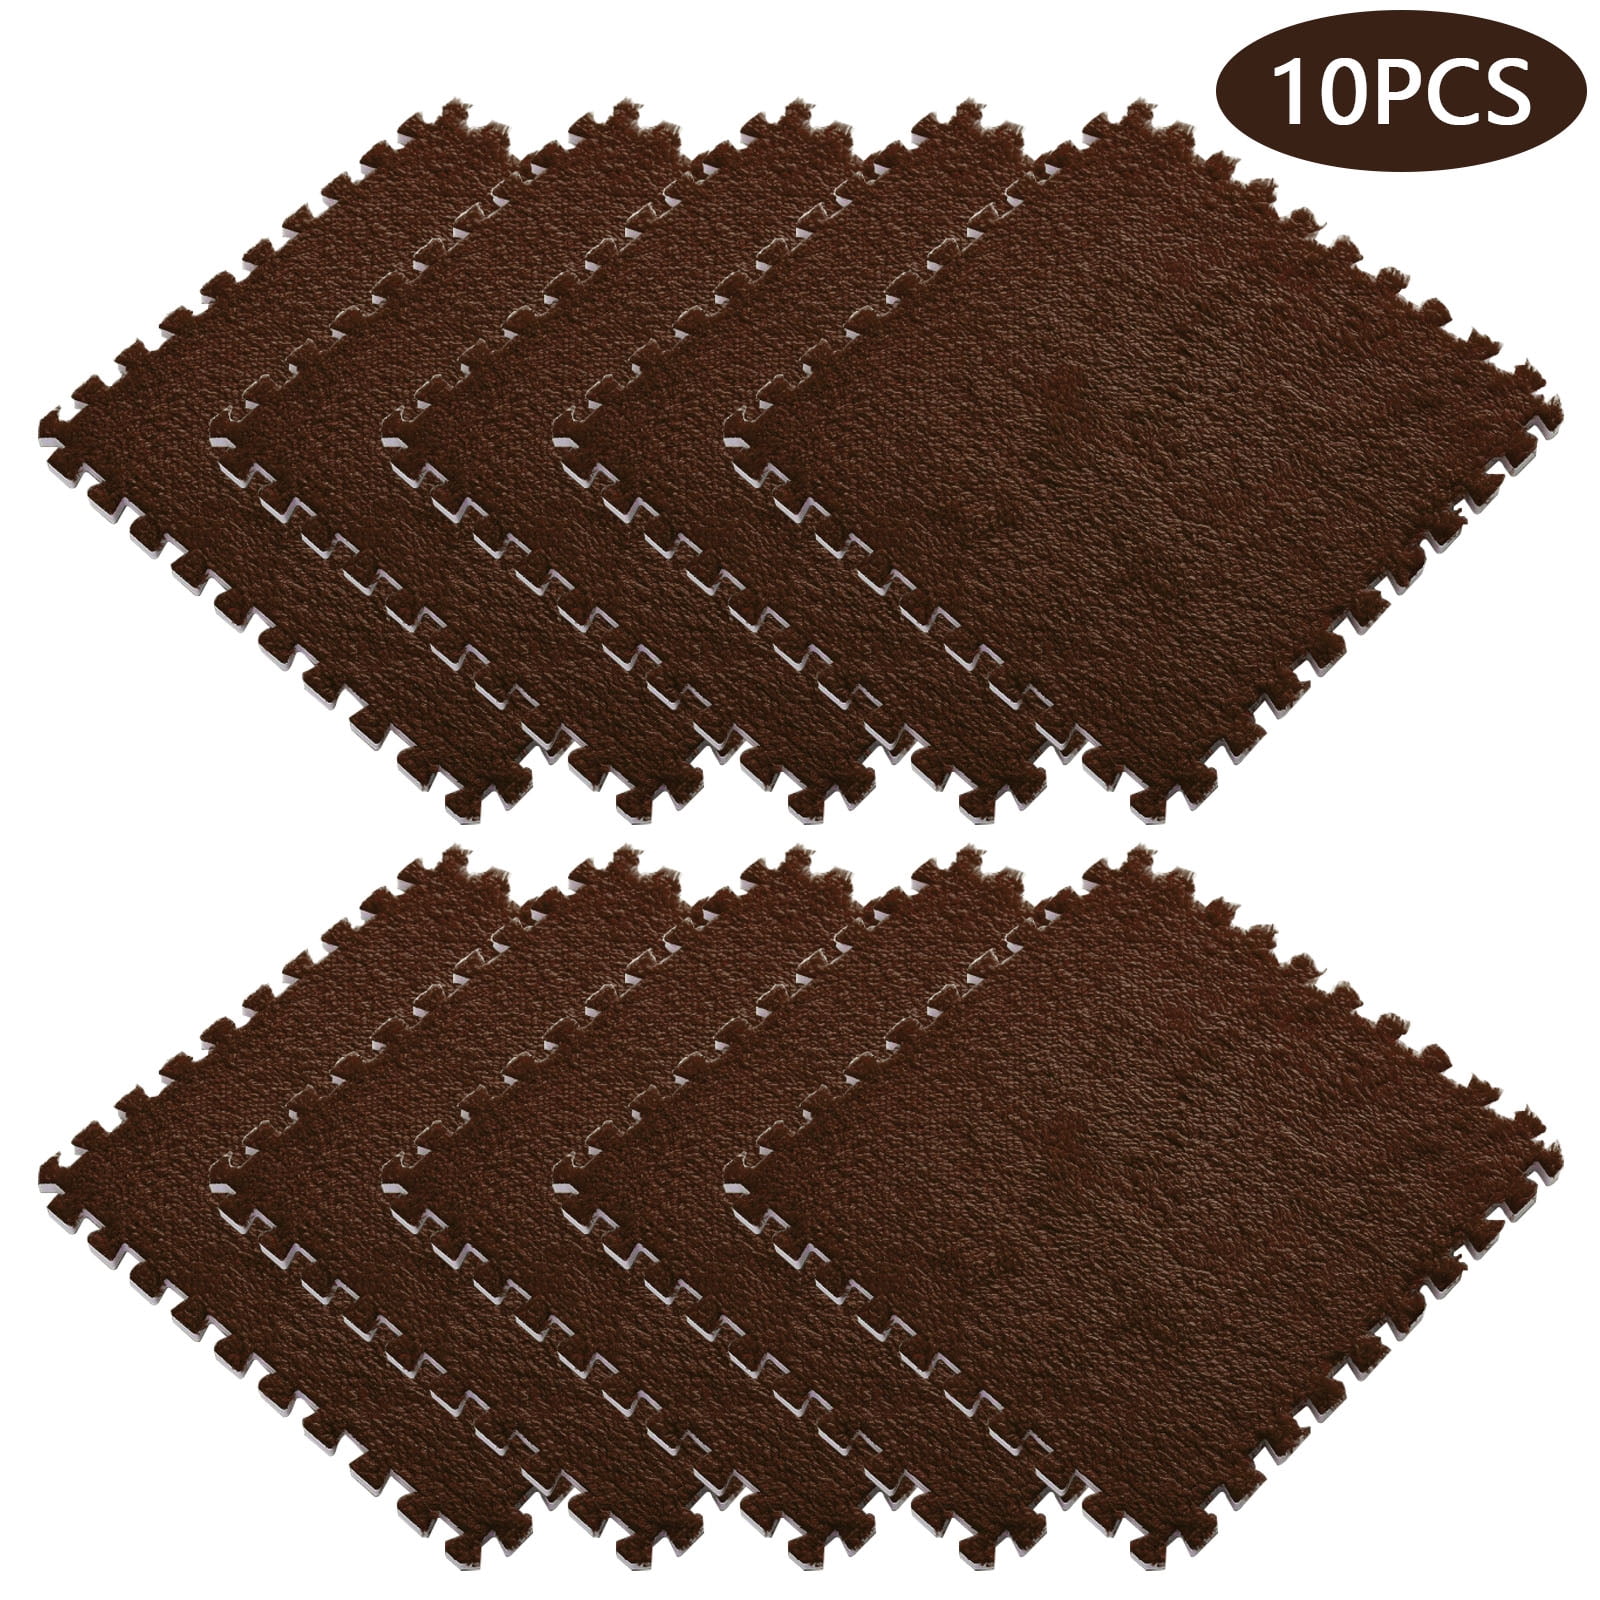  42pcs Plush Thick Foam Interlocking Floor Mats 12X12X0.4  Fluffy Puzzle Carpet Squares Shaggy Area Rug with Border for Parlor Bedroom  Playroom Exerci(Size:30x30x1cm,Color:Light Coffee) : Everything Else